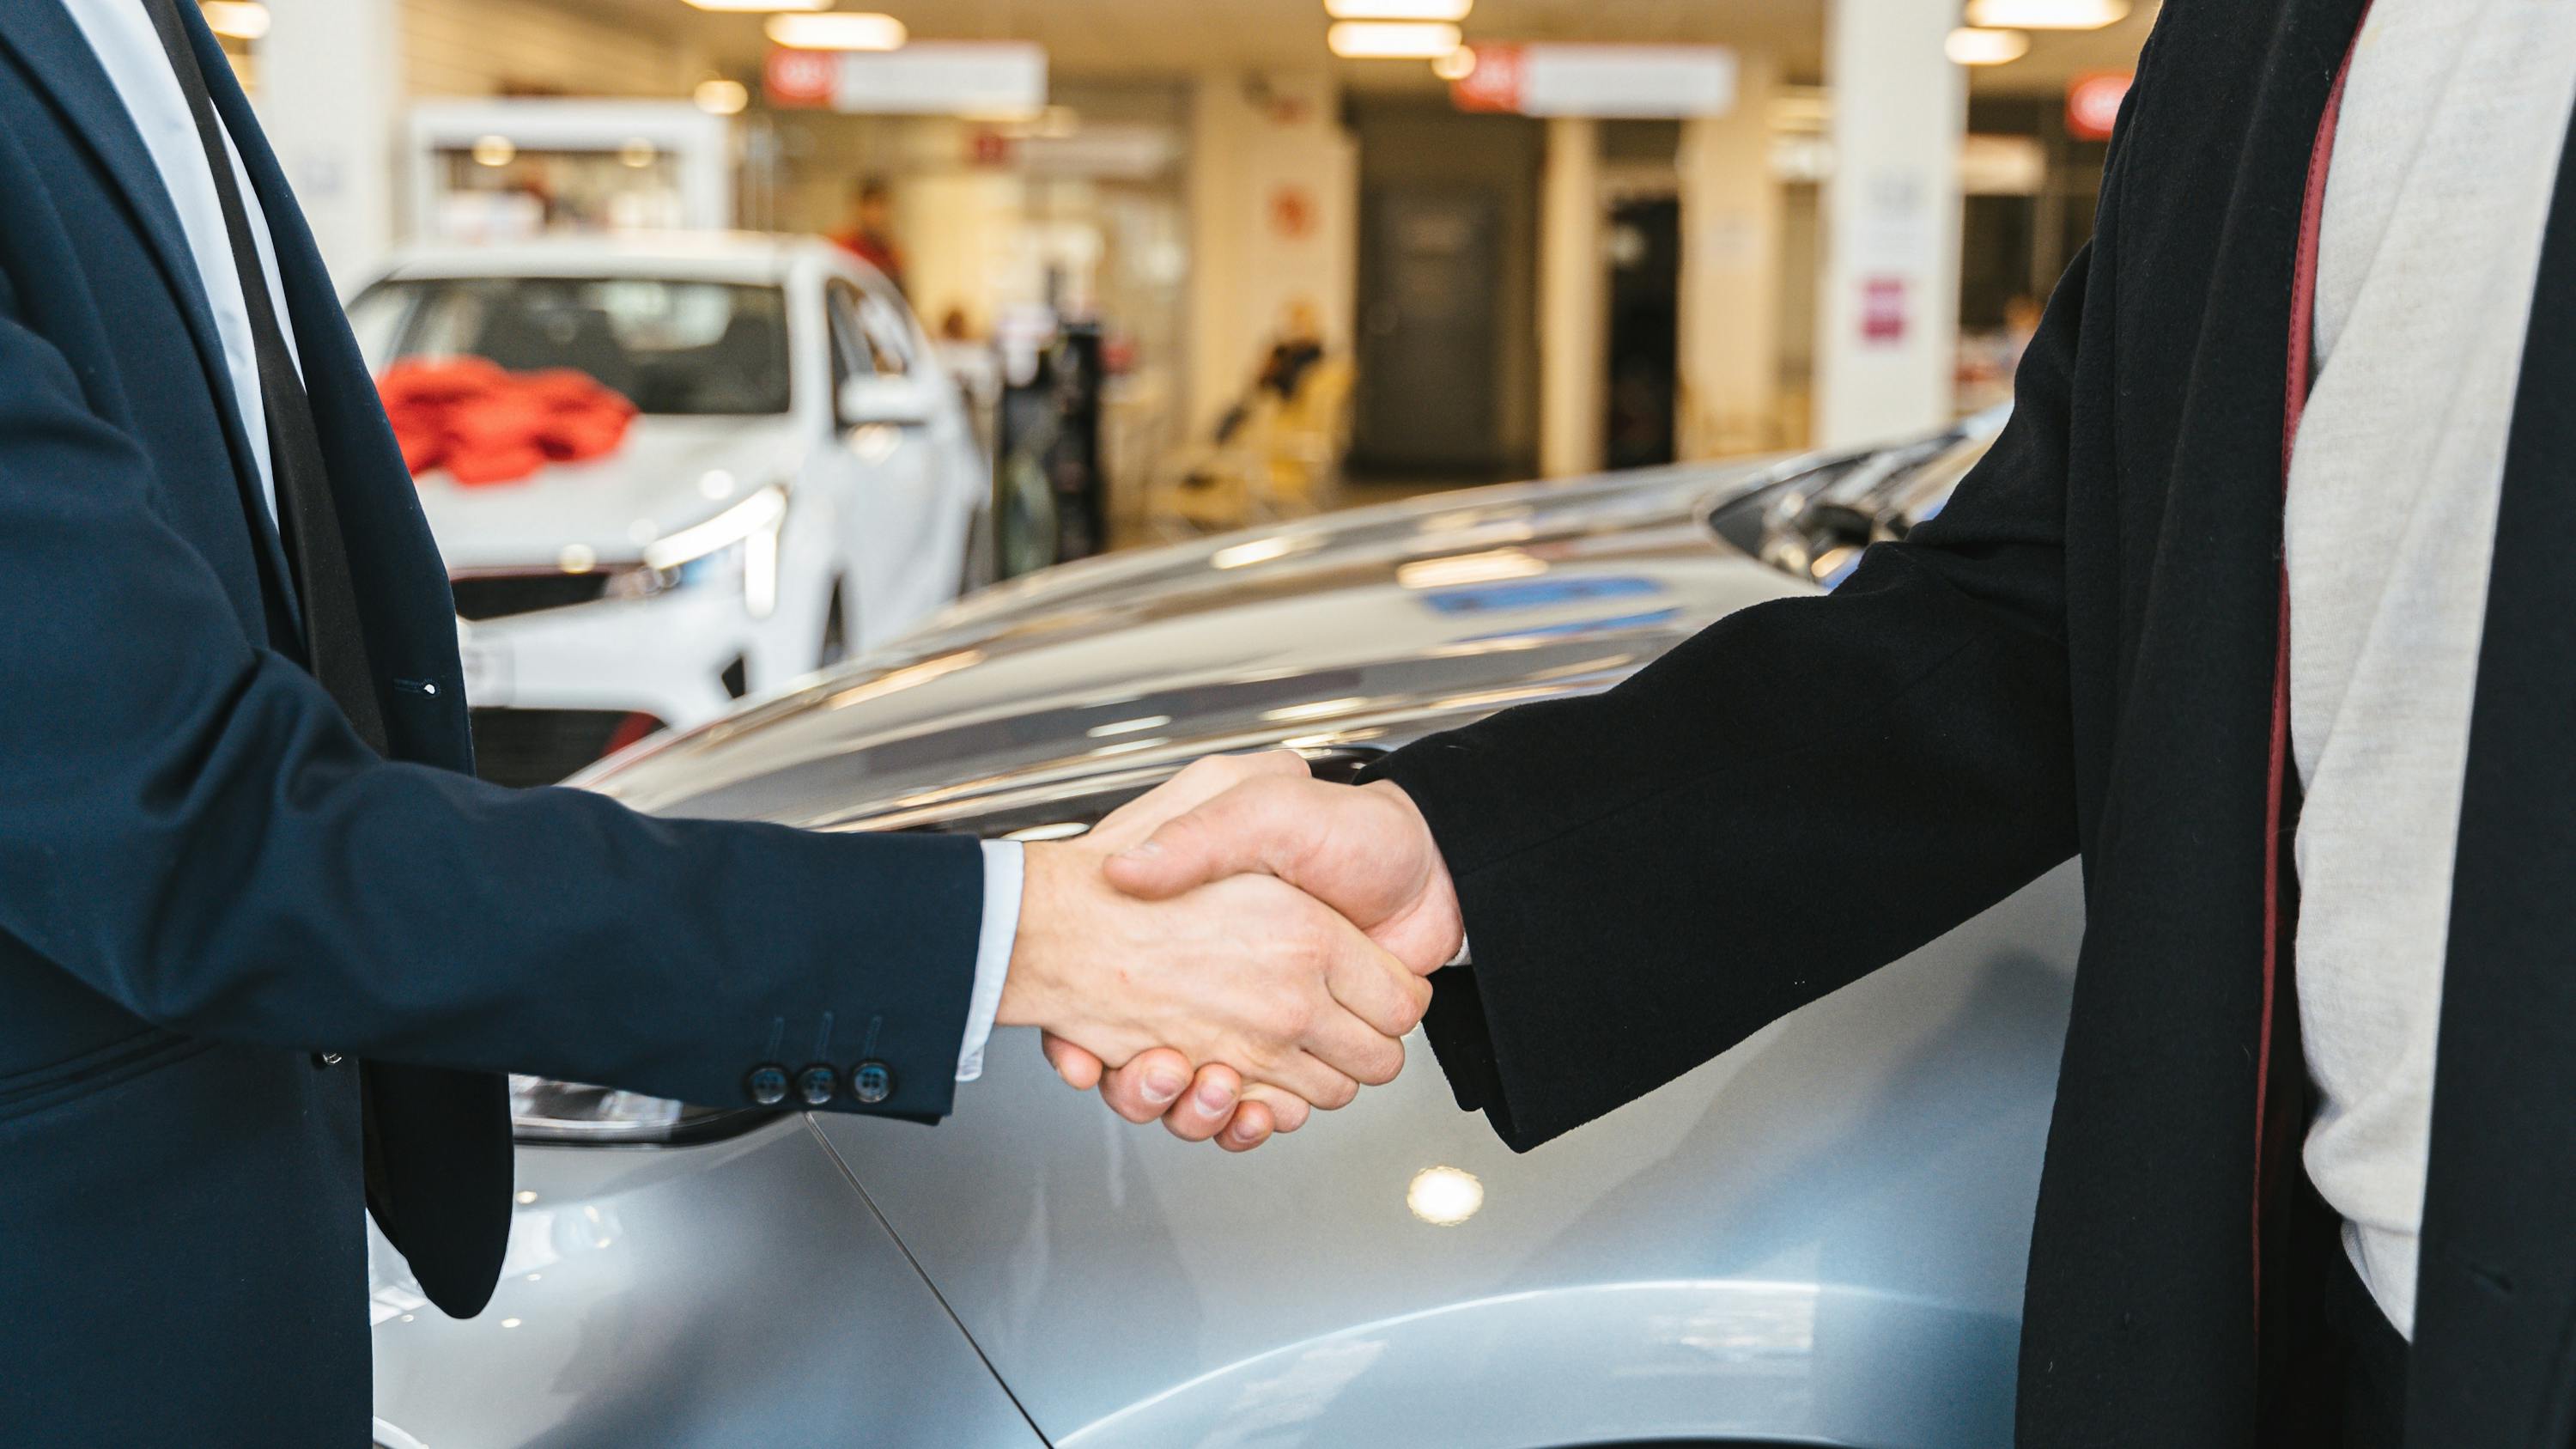 Two people shaking hands in front of a car in a dealership